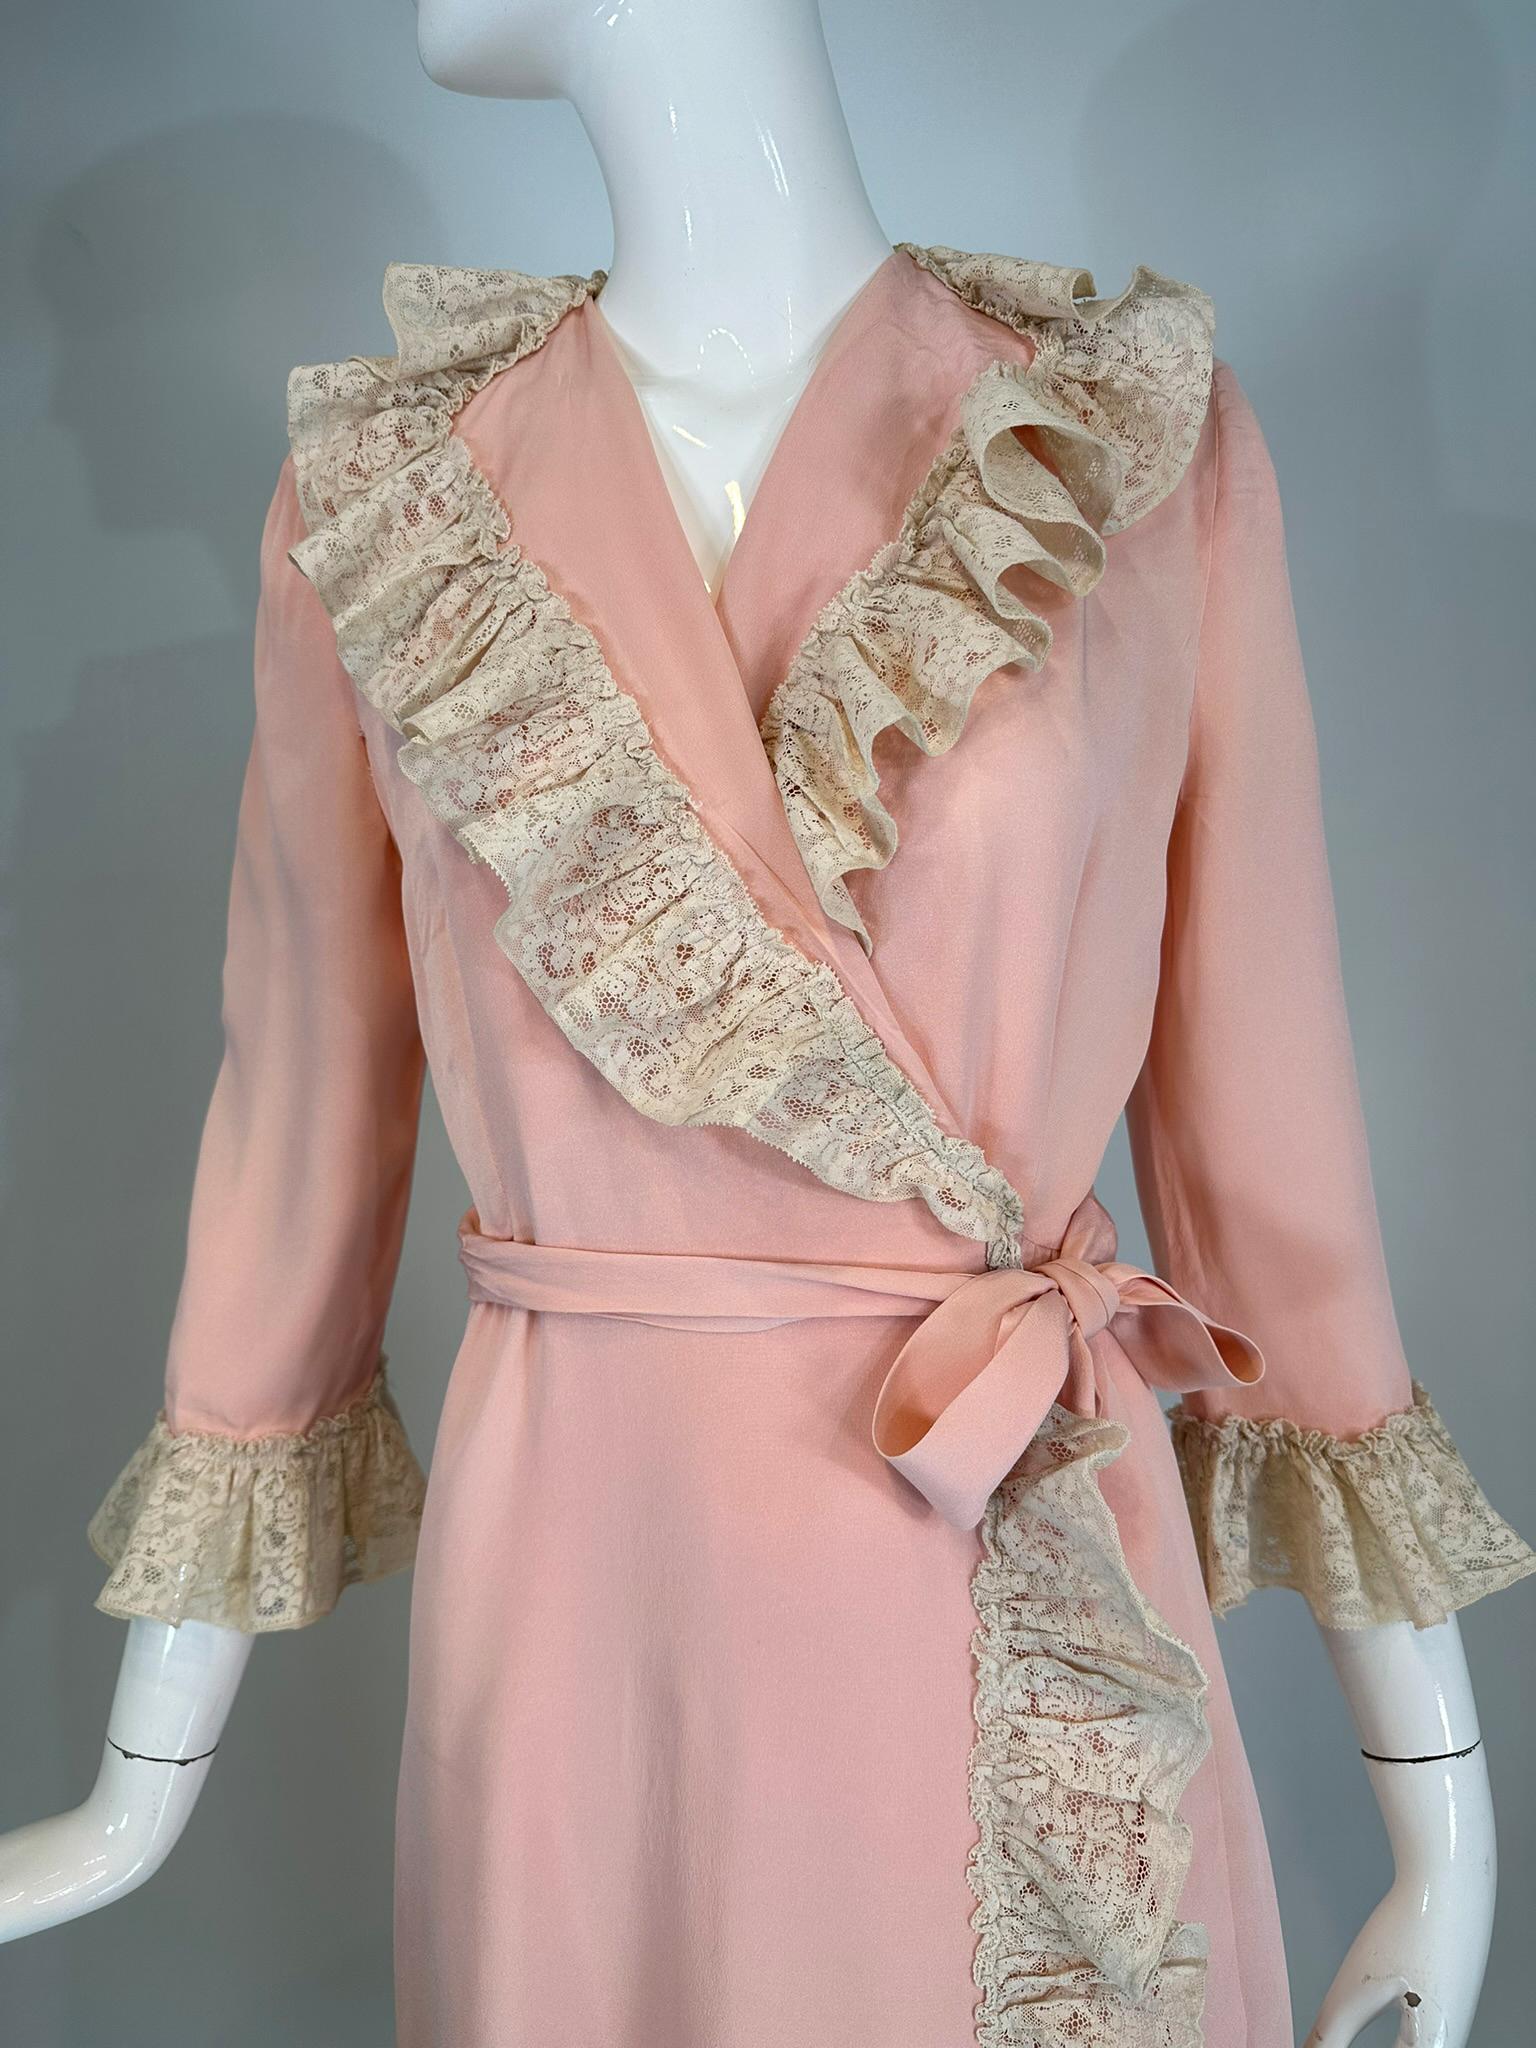 1930s-40s pink rayon with cream lace wrap & tie robe. A beautiful robe reminiscent of robes worn in Hollywood movies from the late 1930s thru the early 1940s. Silky pink rayon is trimmed with a deep ruffle of ivory cream lace. The robe has a deep